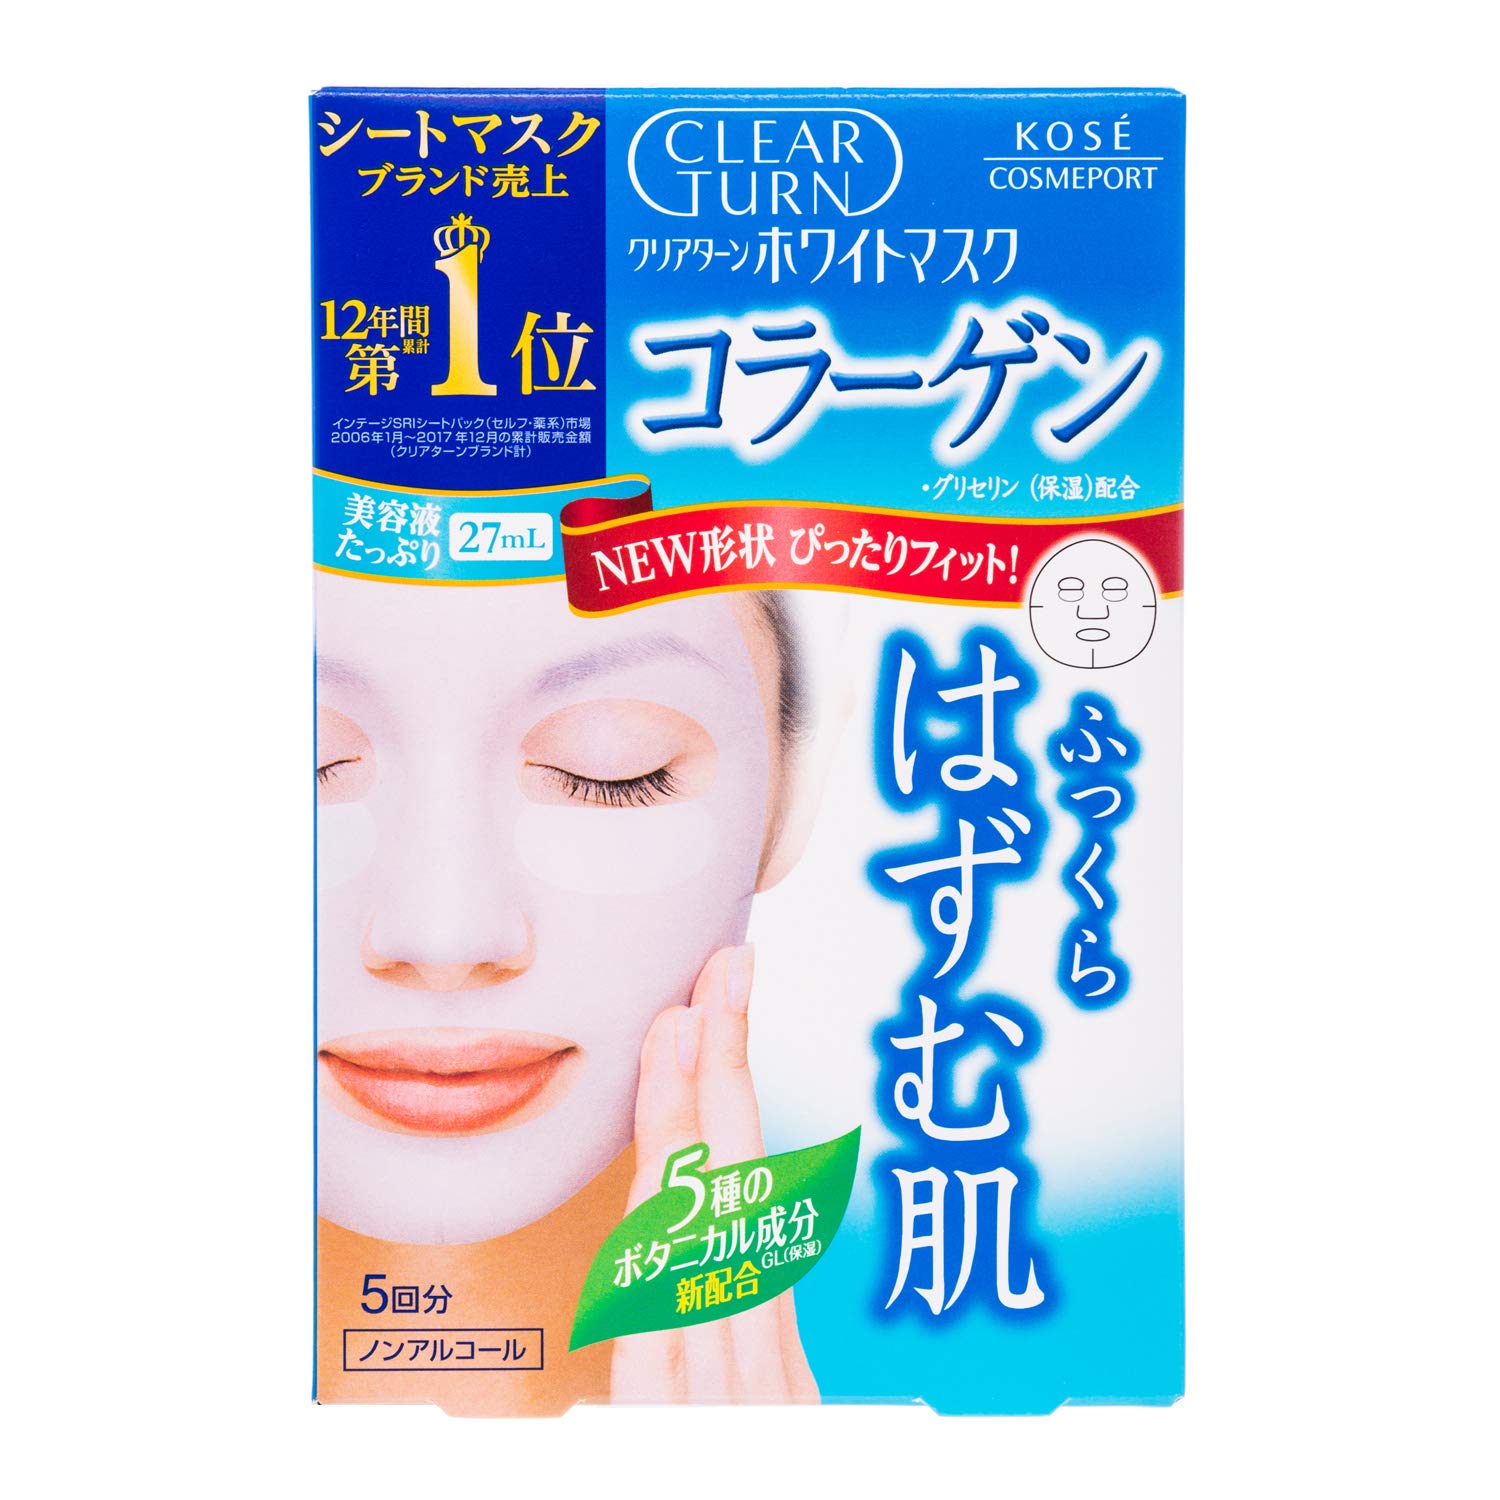 KOSE Clear Turn Collagen Sheet Mask - 1 Box Of 5 Sheets